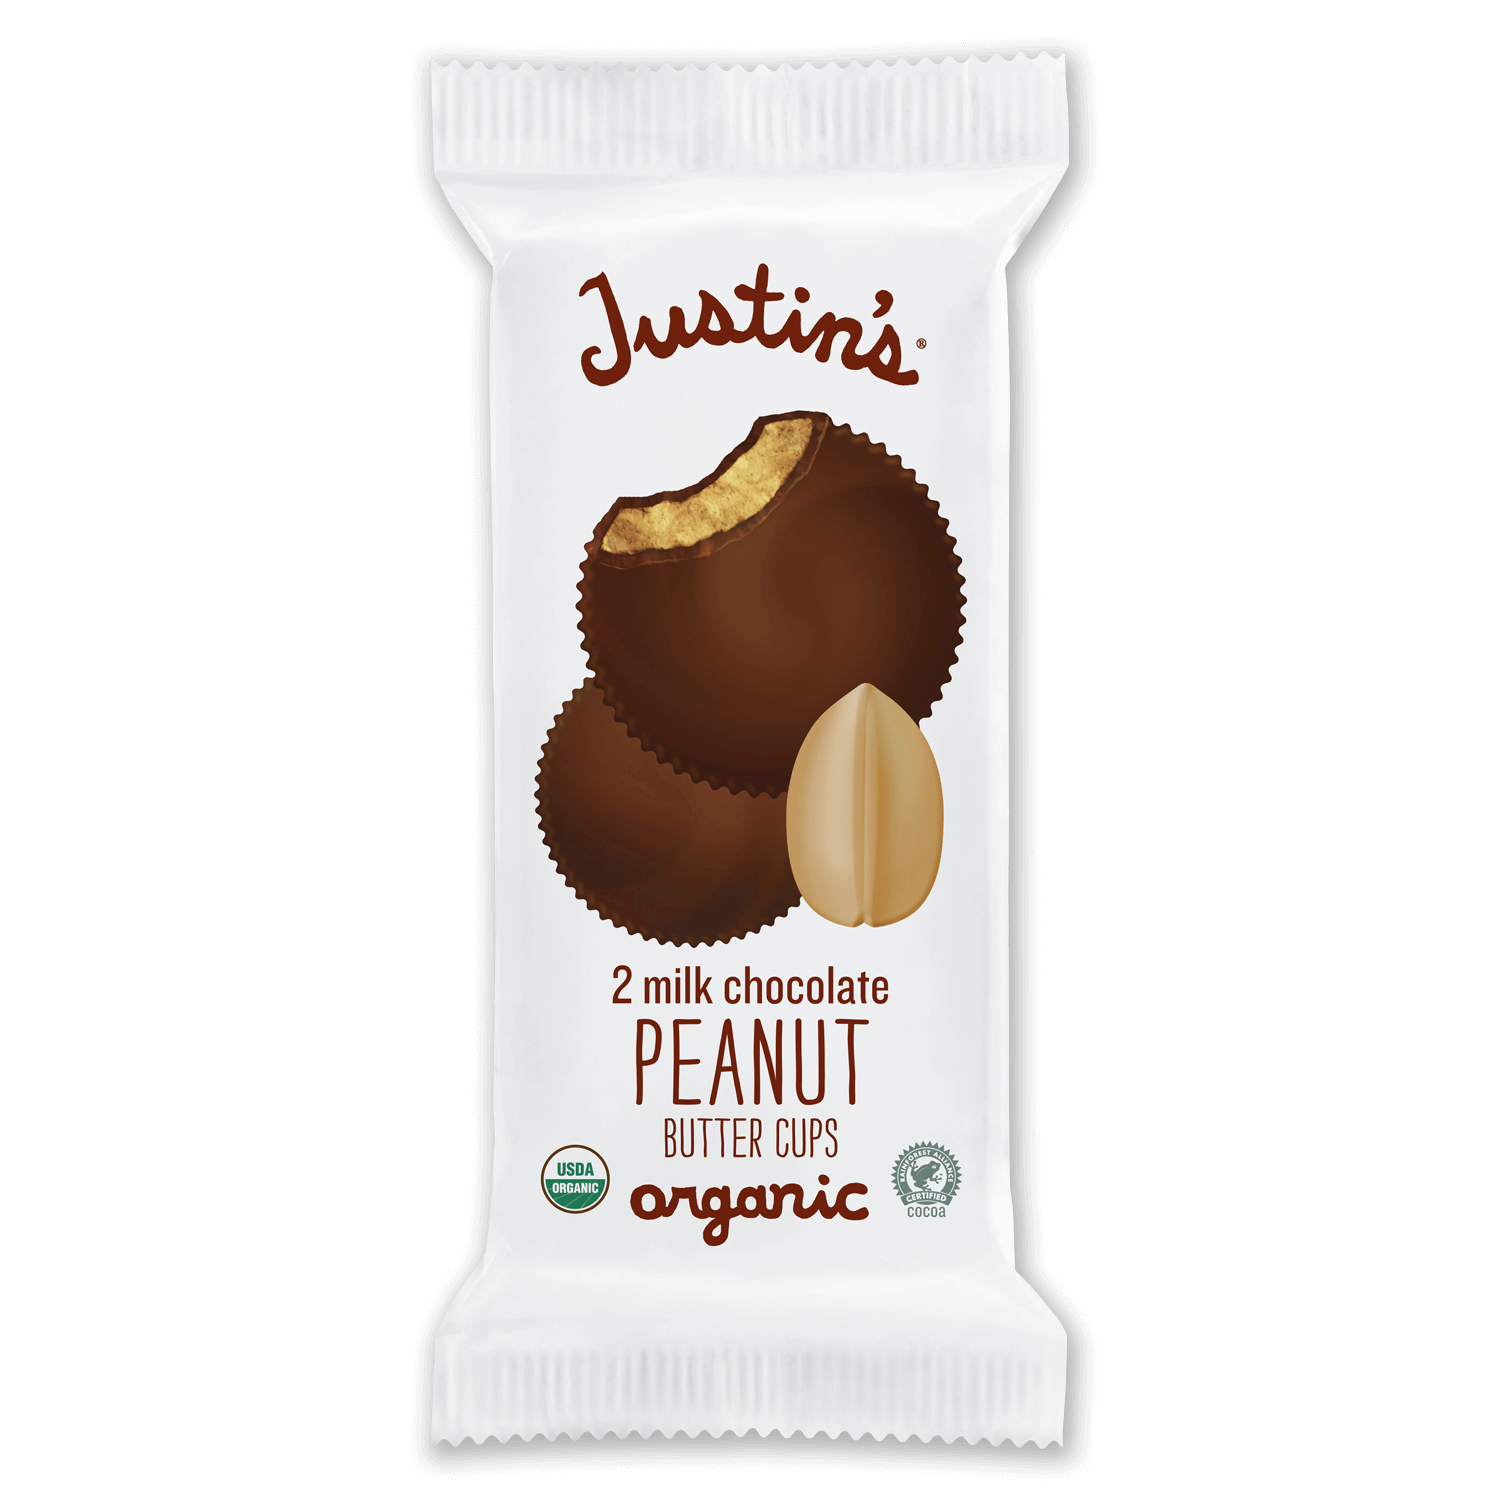 Justin's Milk Chocolate Peanut Butter Cups 2-piece packages 1.4 oz.